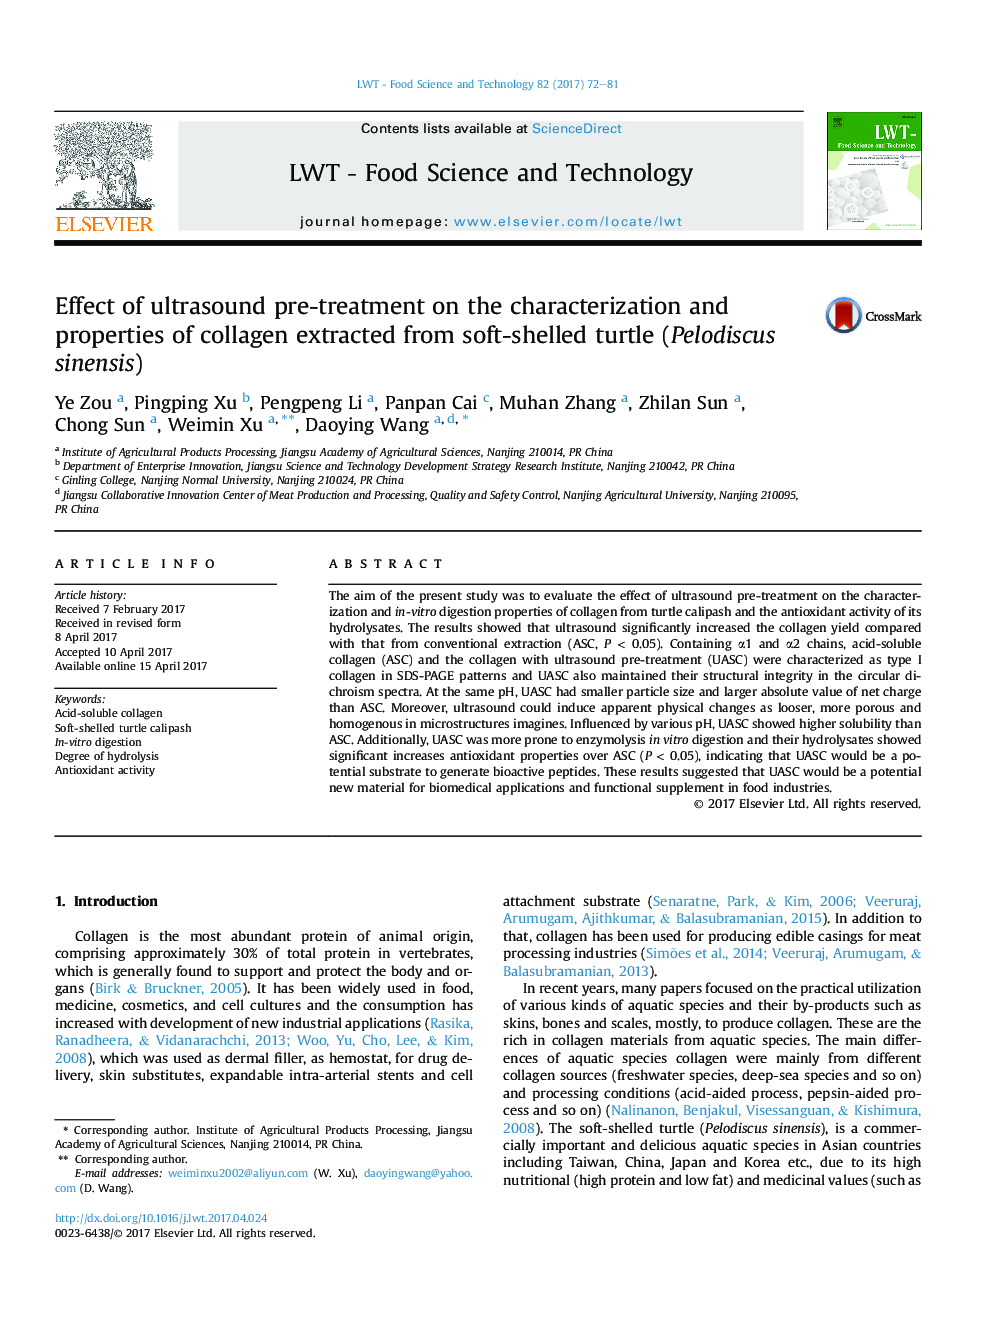 Effect of ultrasound pre-treatment on the characterization and properties of collagen extracted from soft-shelled turtle (Pelodiscus sinensis)